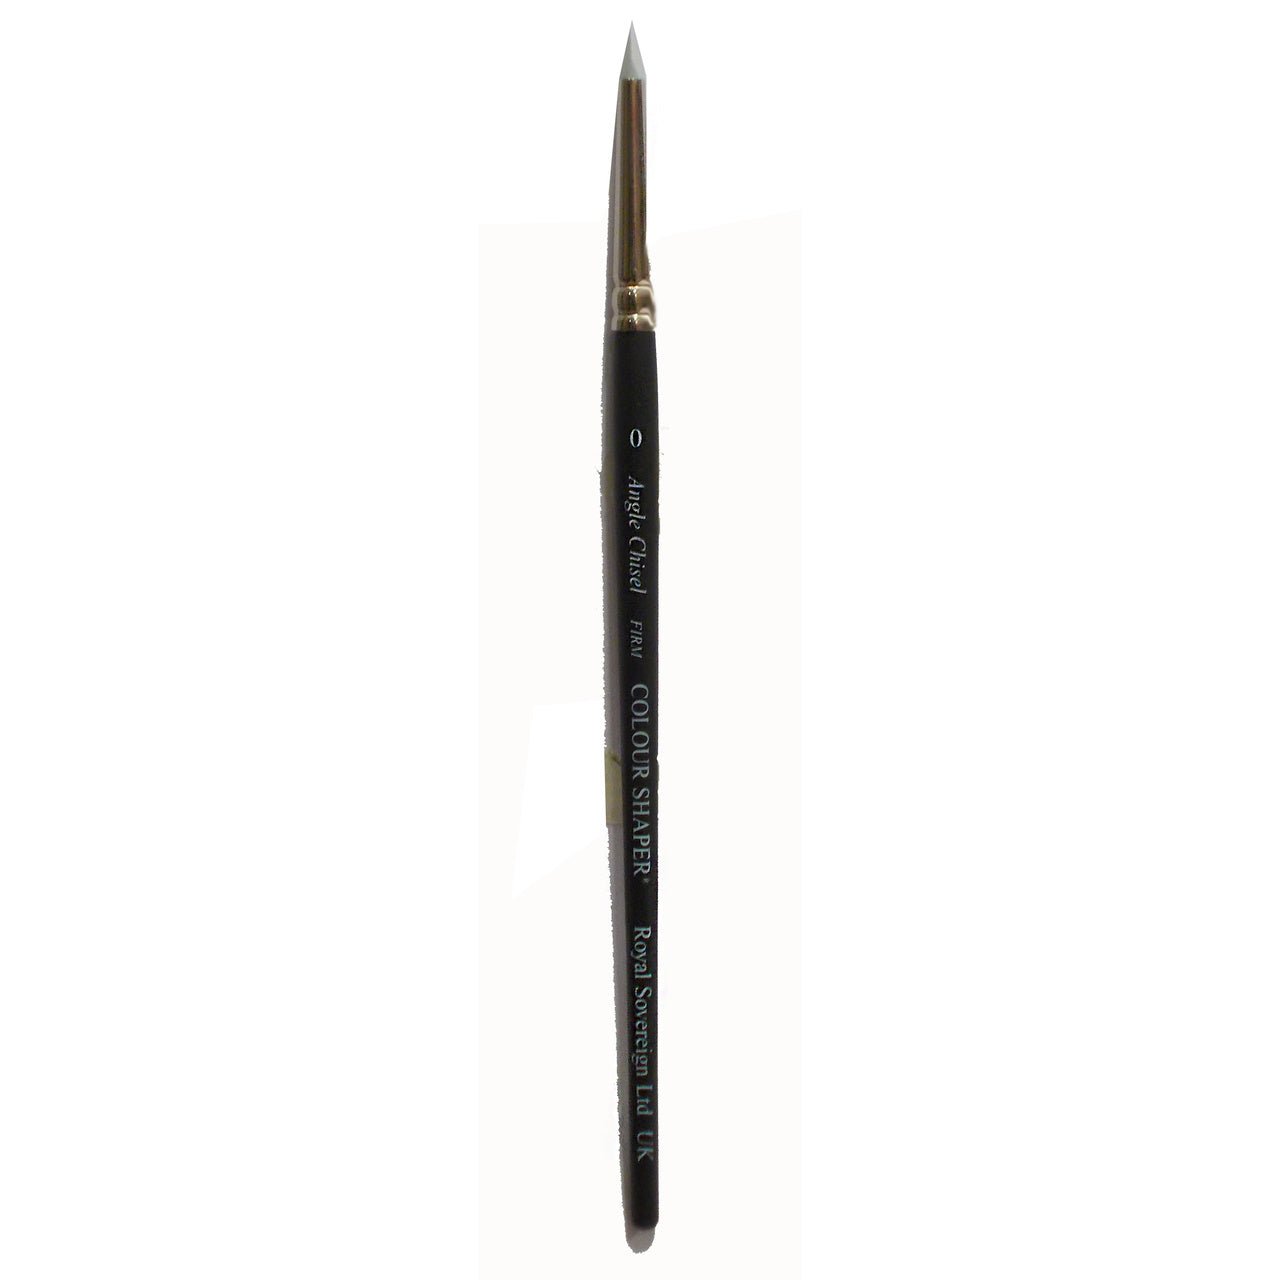 Colour Shaper - Firm - Angle Chisel 0 - merriartist.com